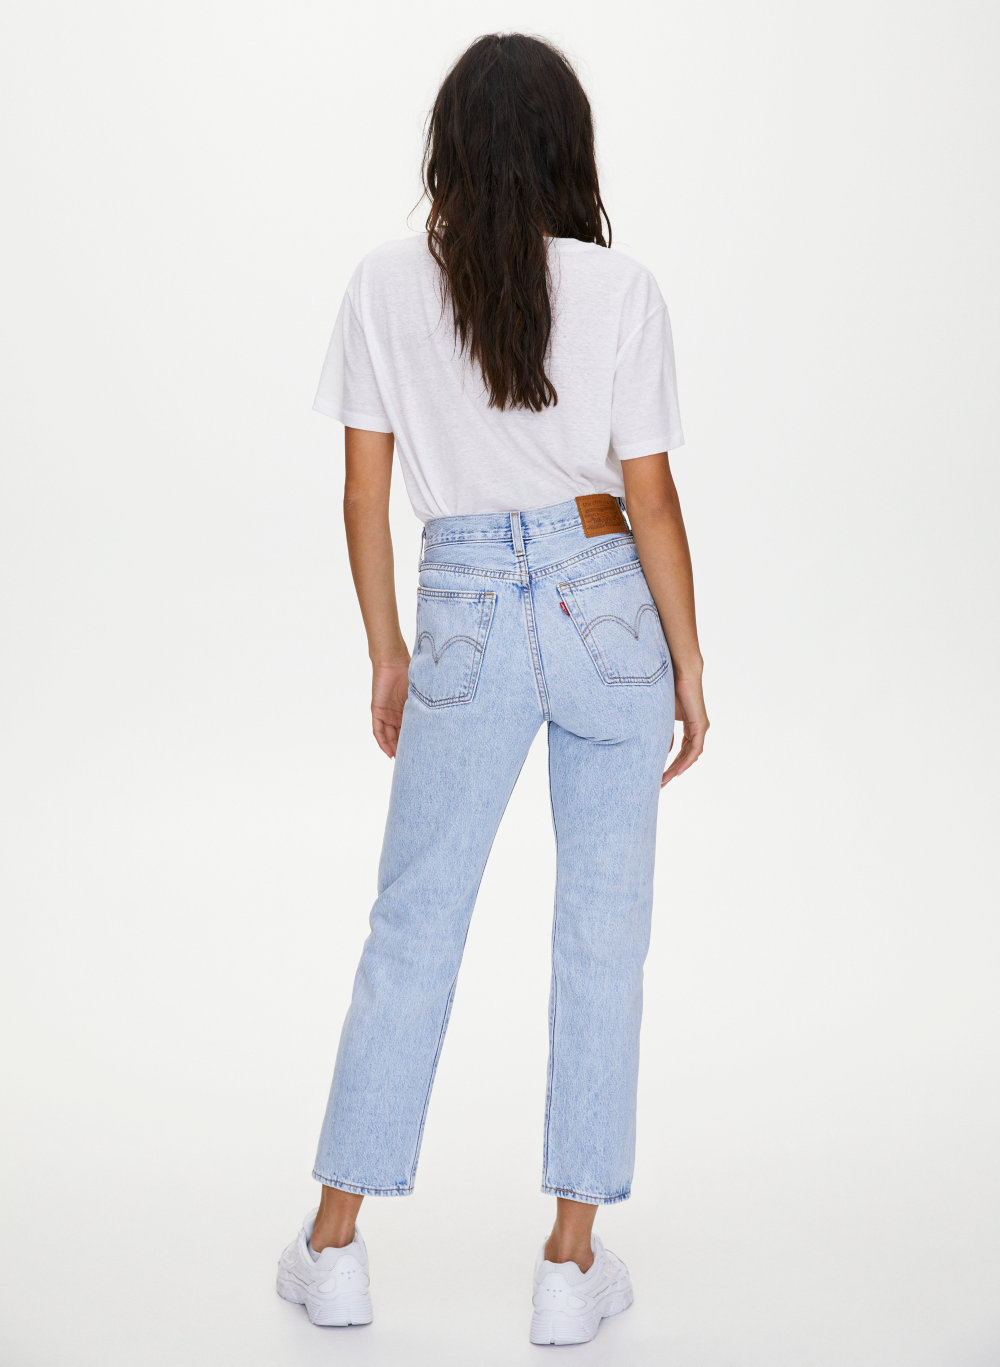 wedgie mom jeans